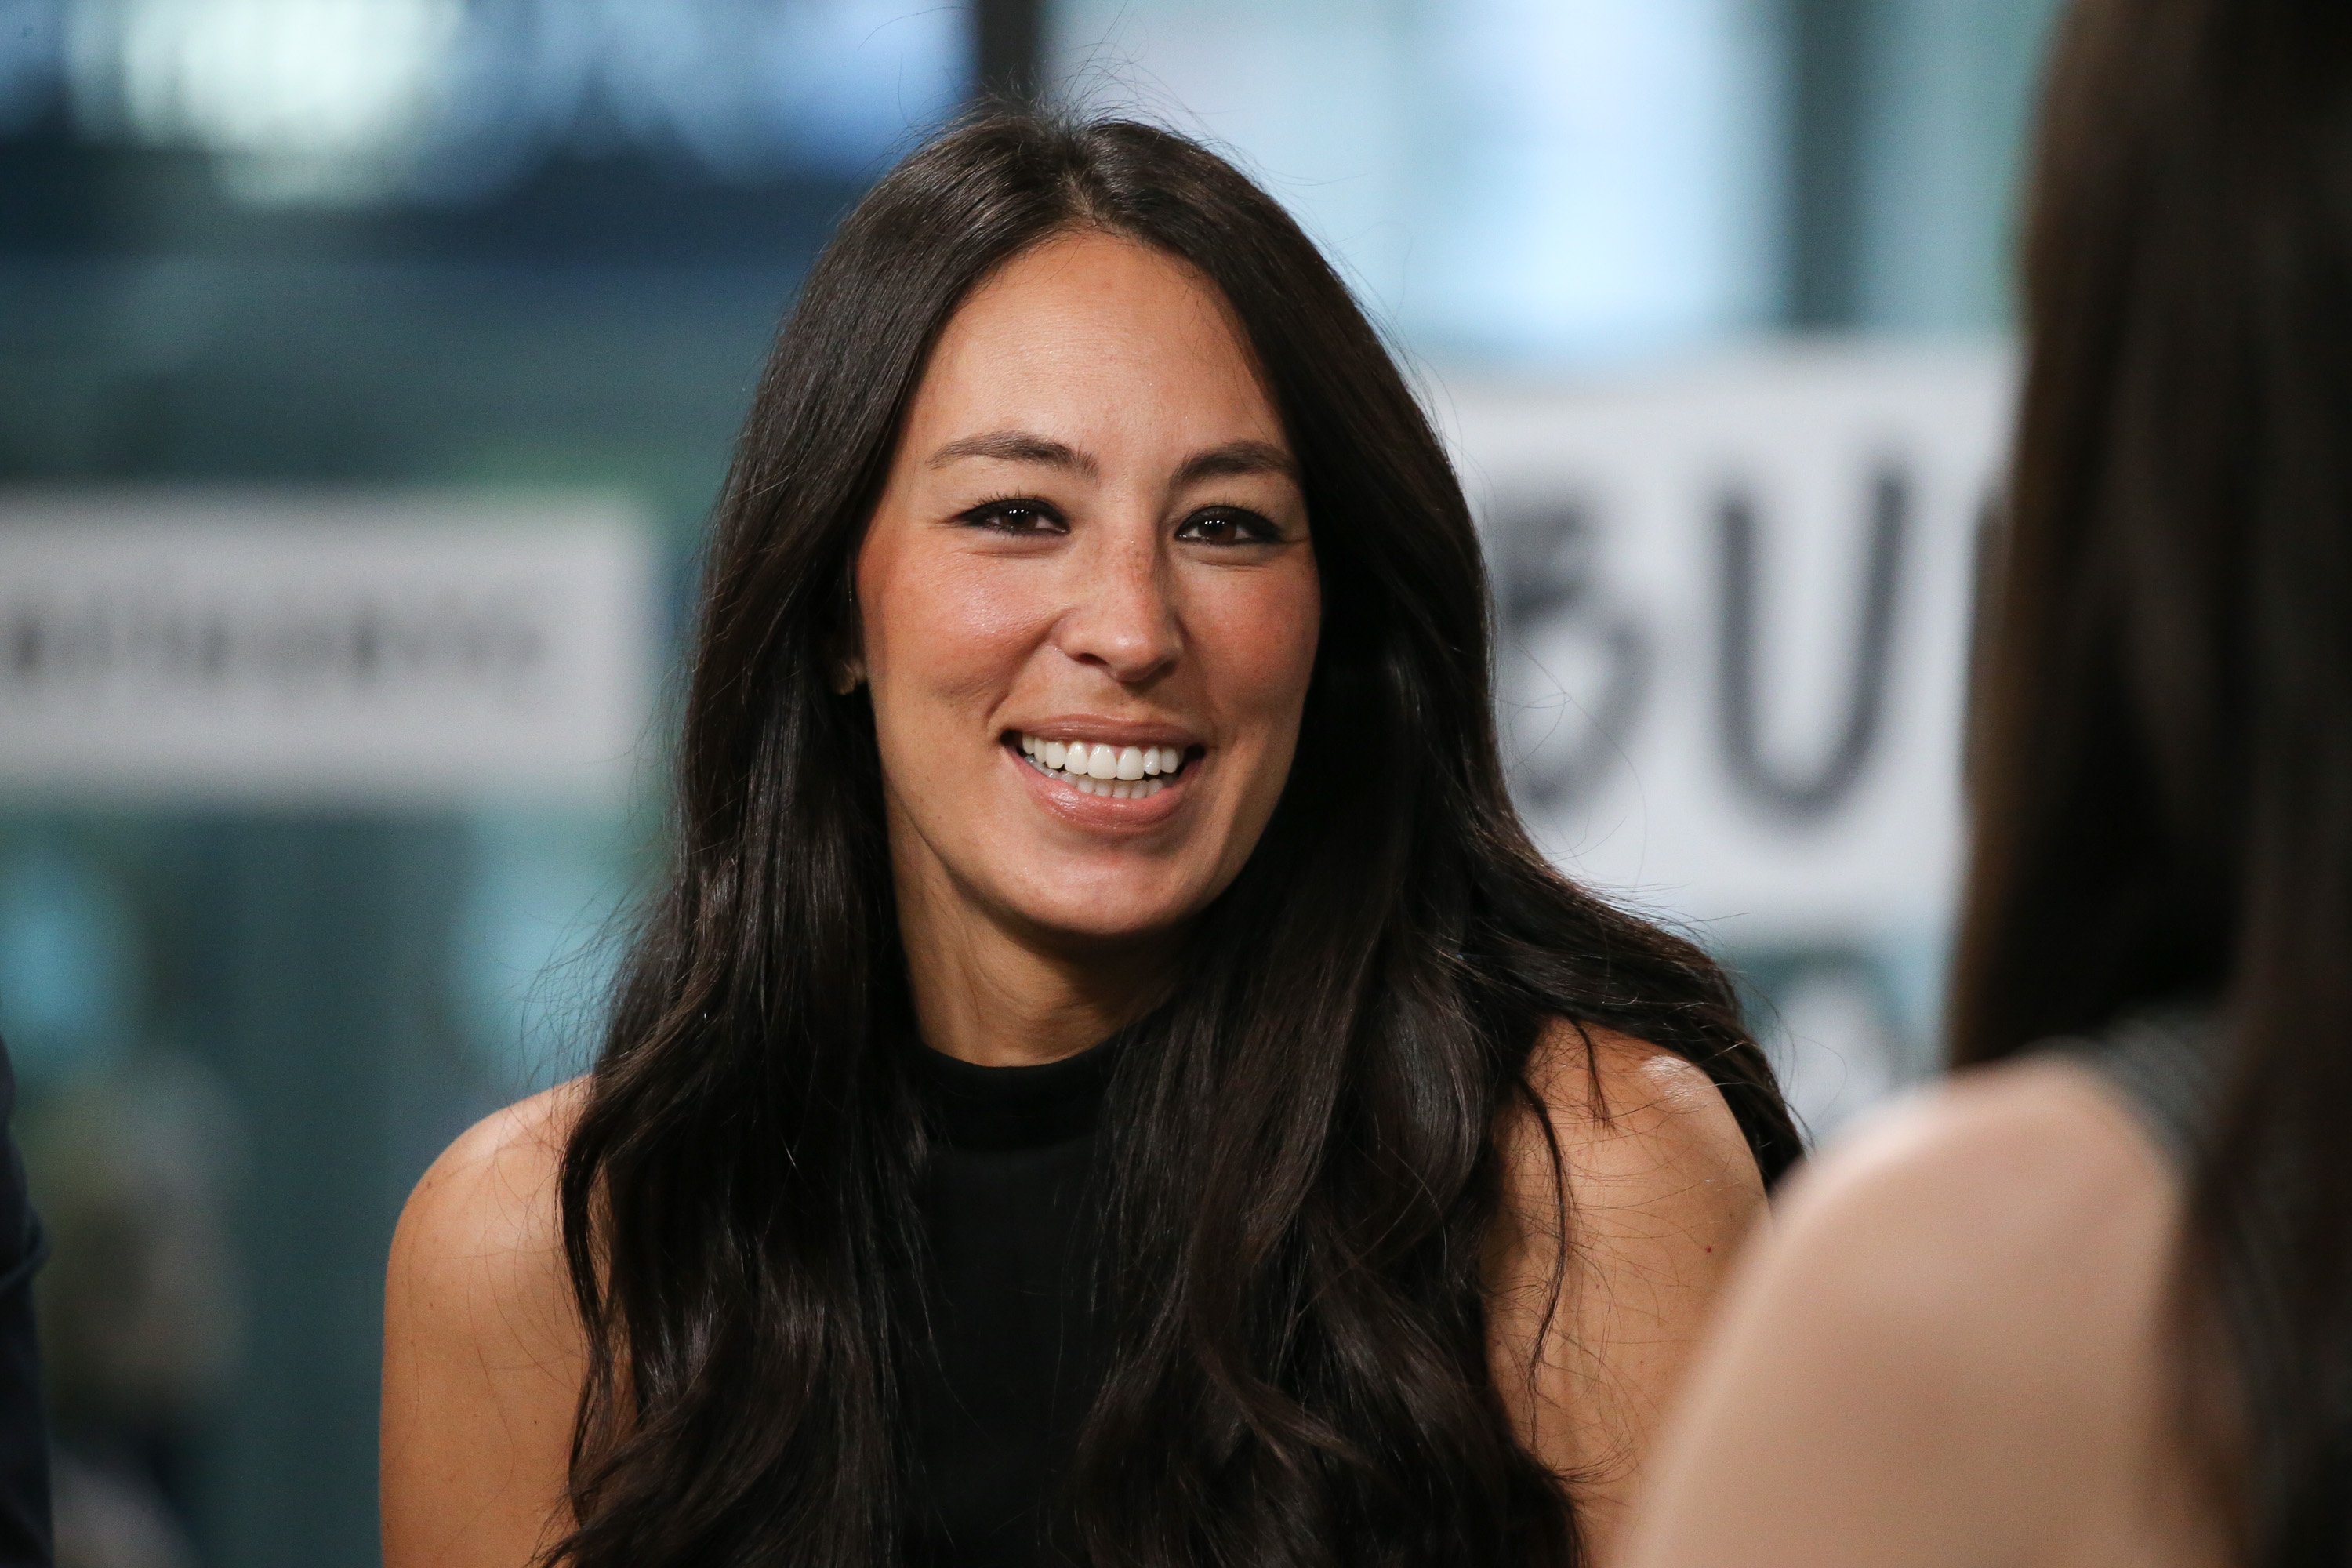 Joanna Gaines during an interview in 2017